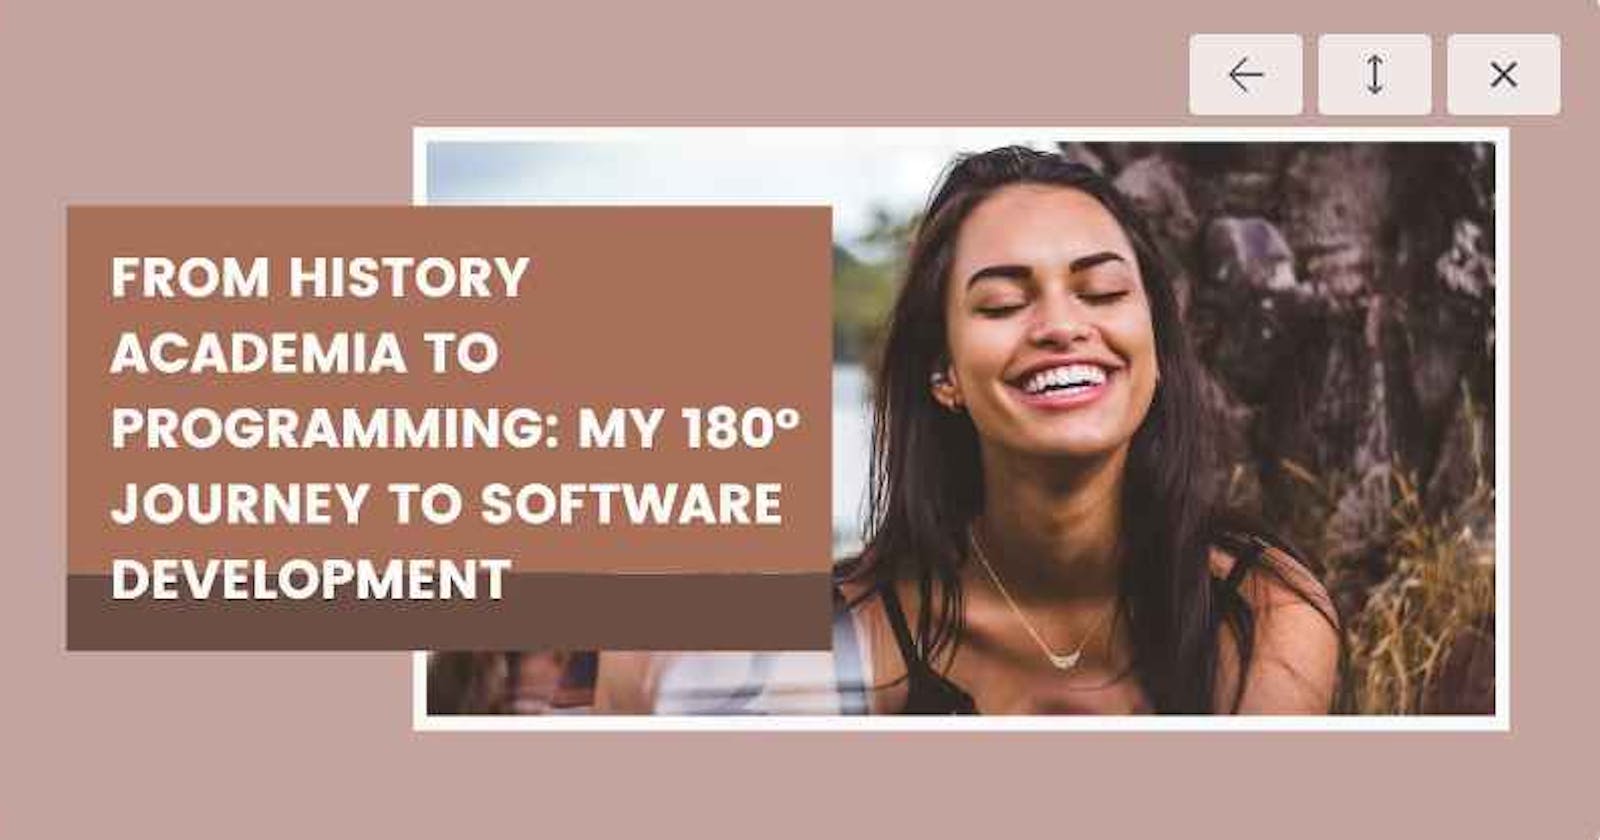 From History Academia to Programming: My 180° Journey to Software development